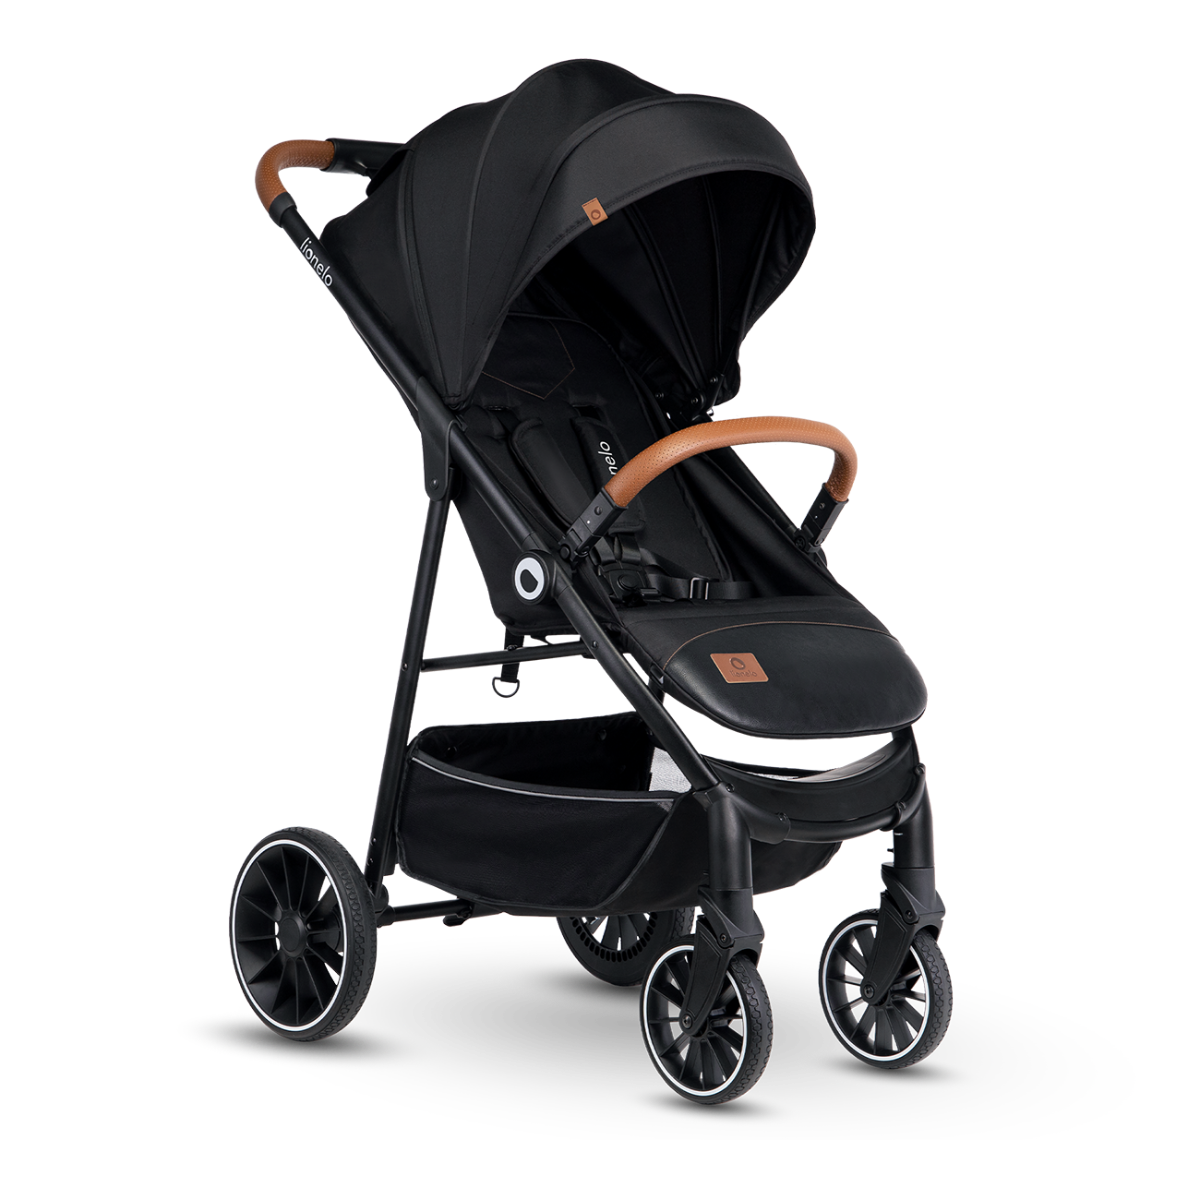 ALEXIA Black Onyx Baby LIONELO Compact Stroller Kids Buggy Pushchair Footmuff